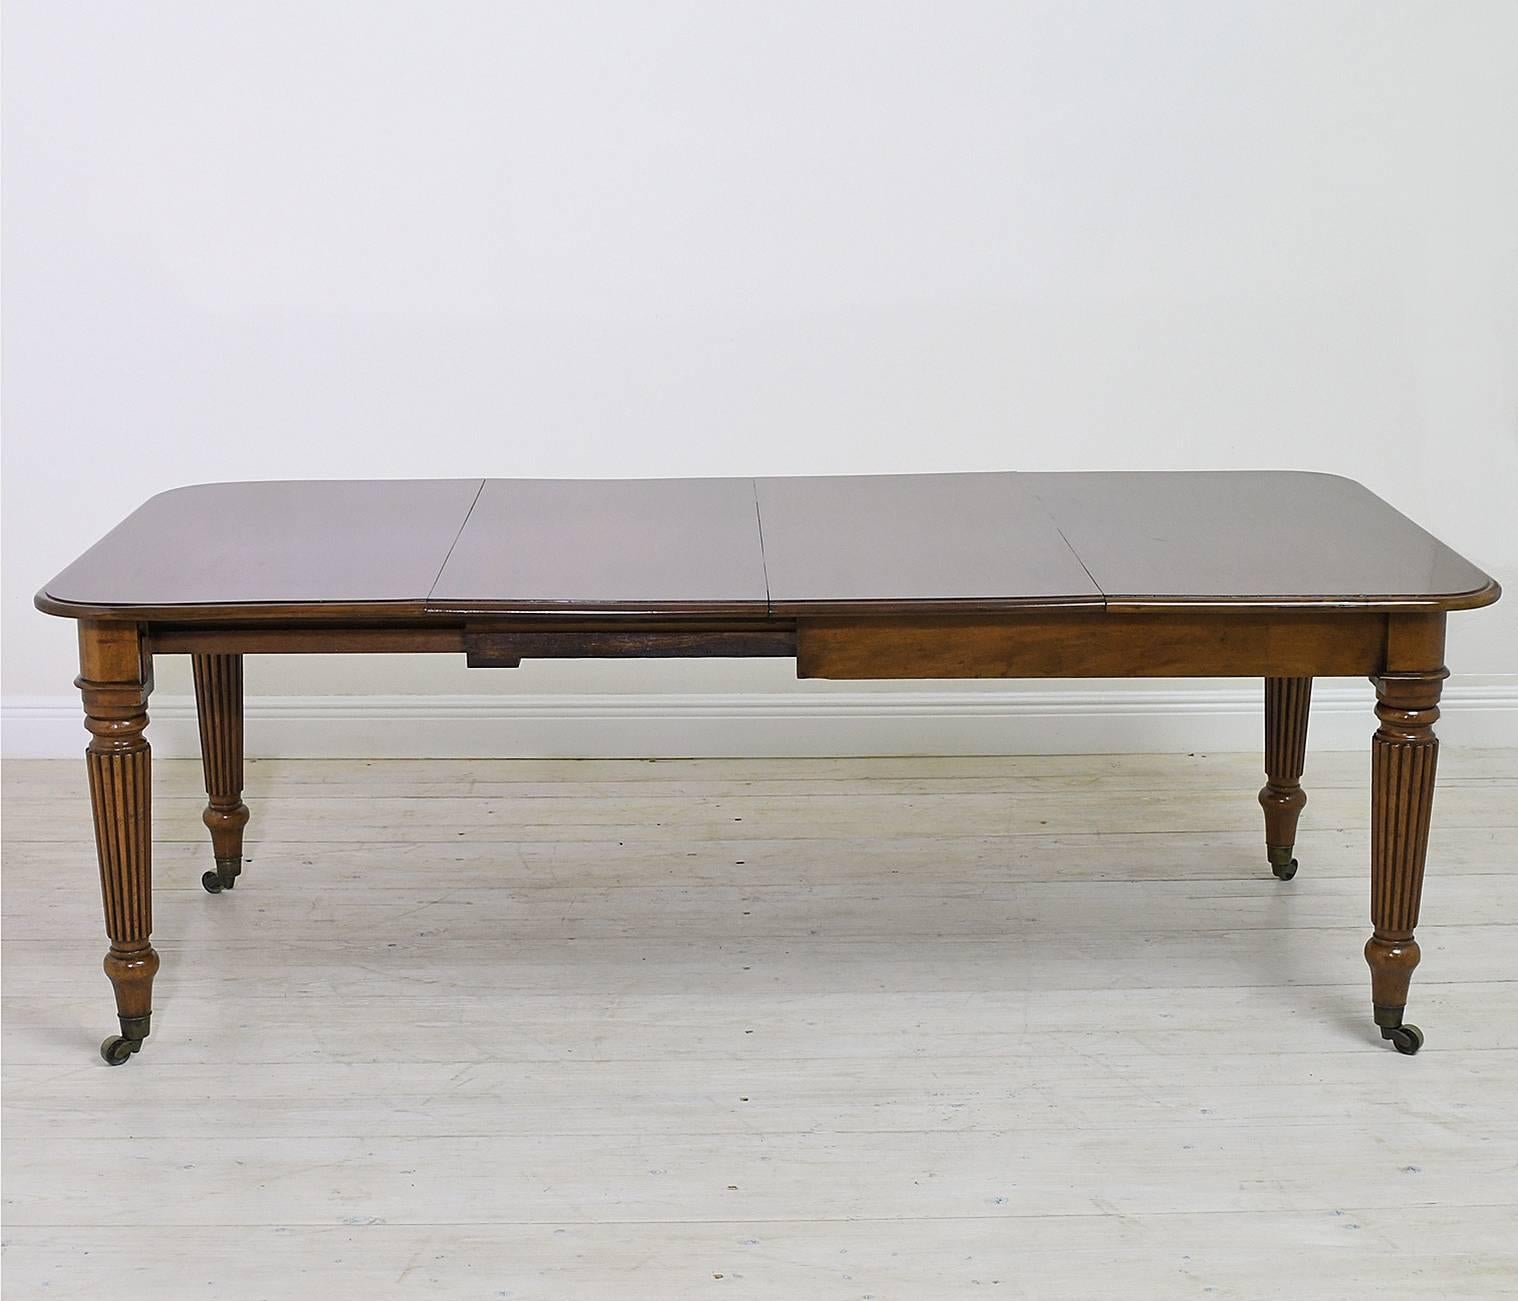 A beautiful and functional extension dining table in mahogany with turned and reeded legs ending on original brass castors. Comes with two original, un-skirted leaves or plates, England, circa 1845.
Measures: Closed 46